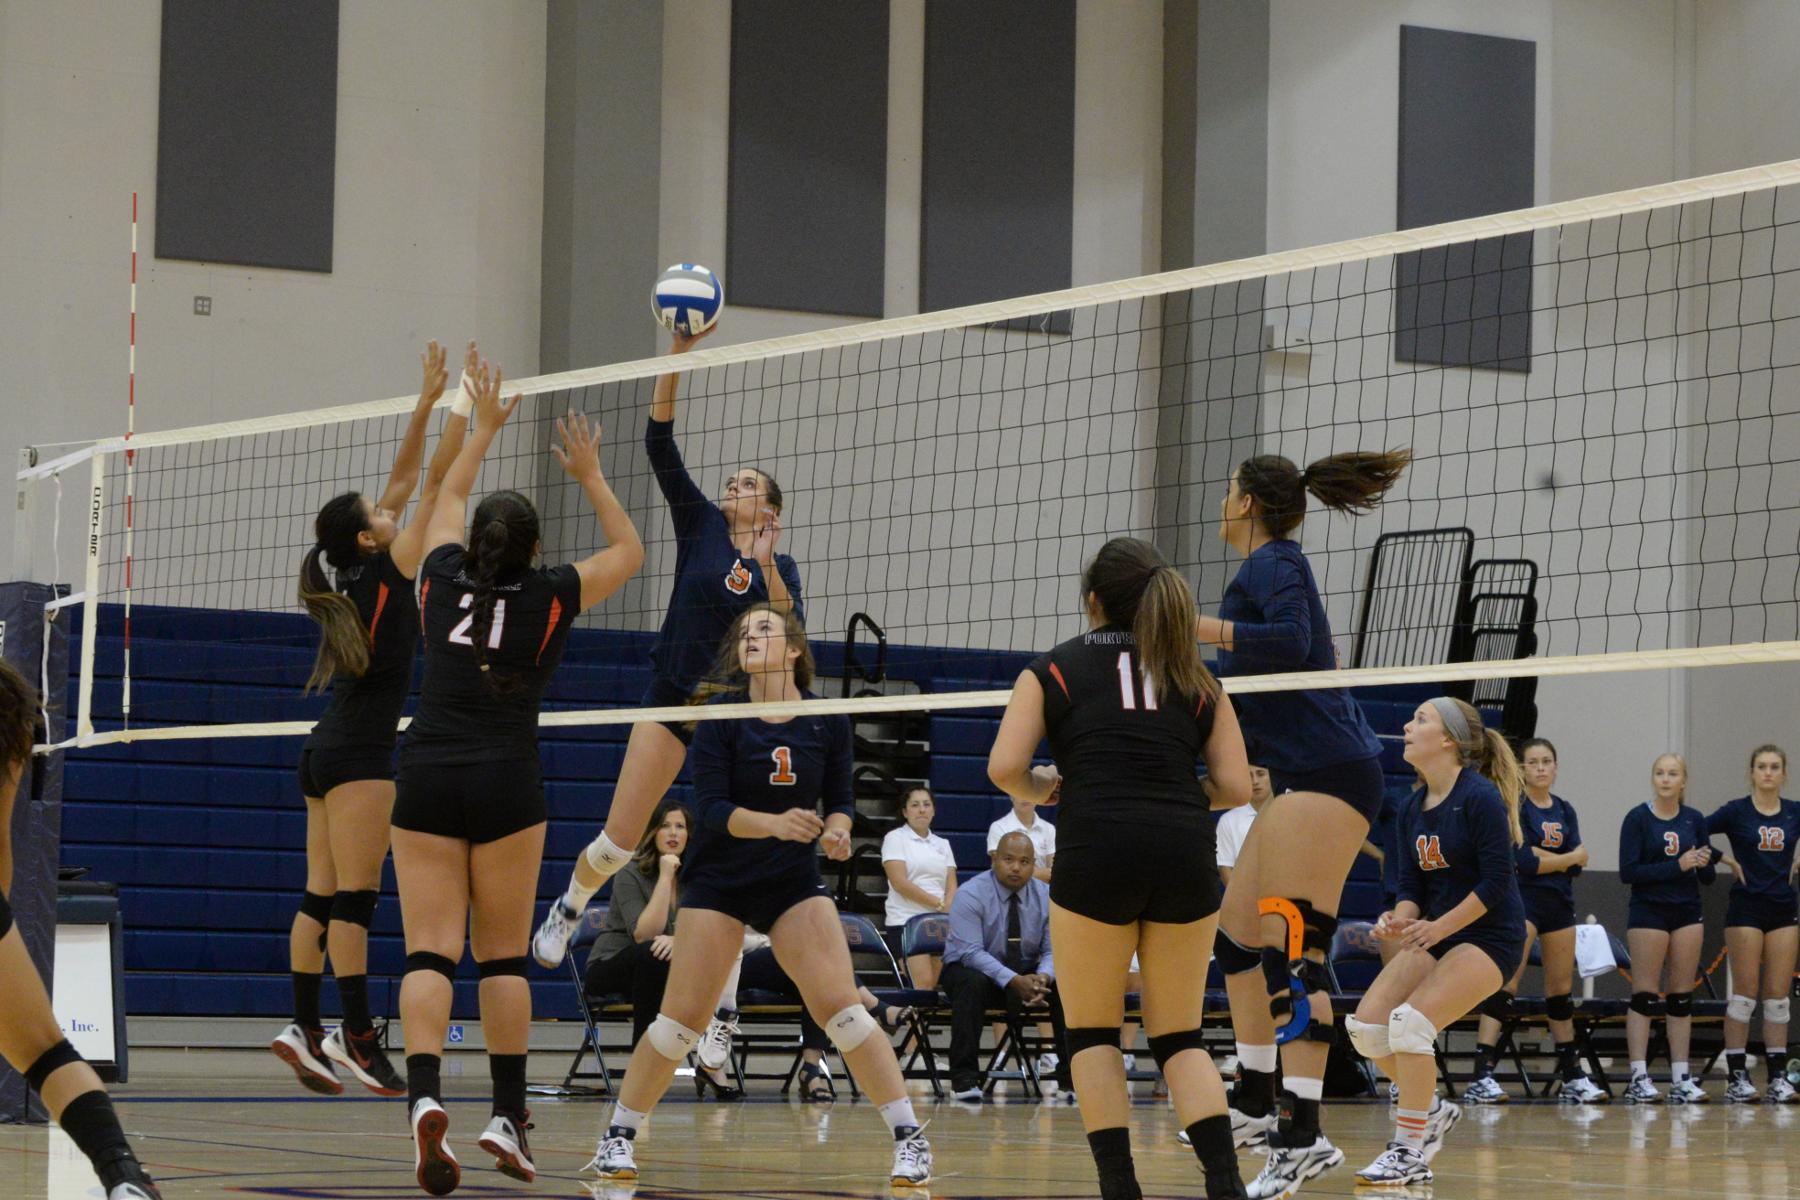 Volleyball Wins Their Home Opener